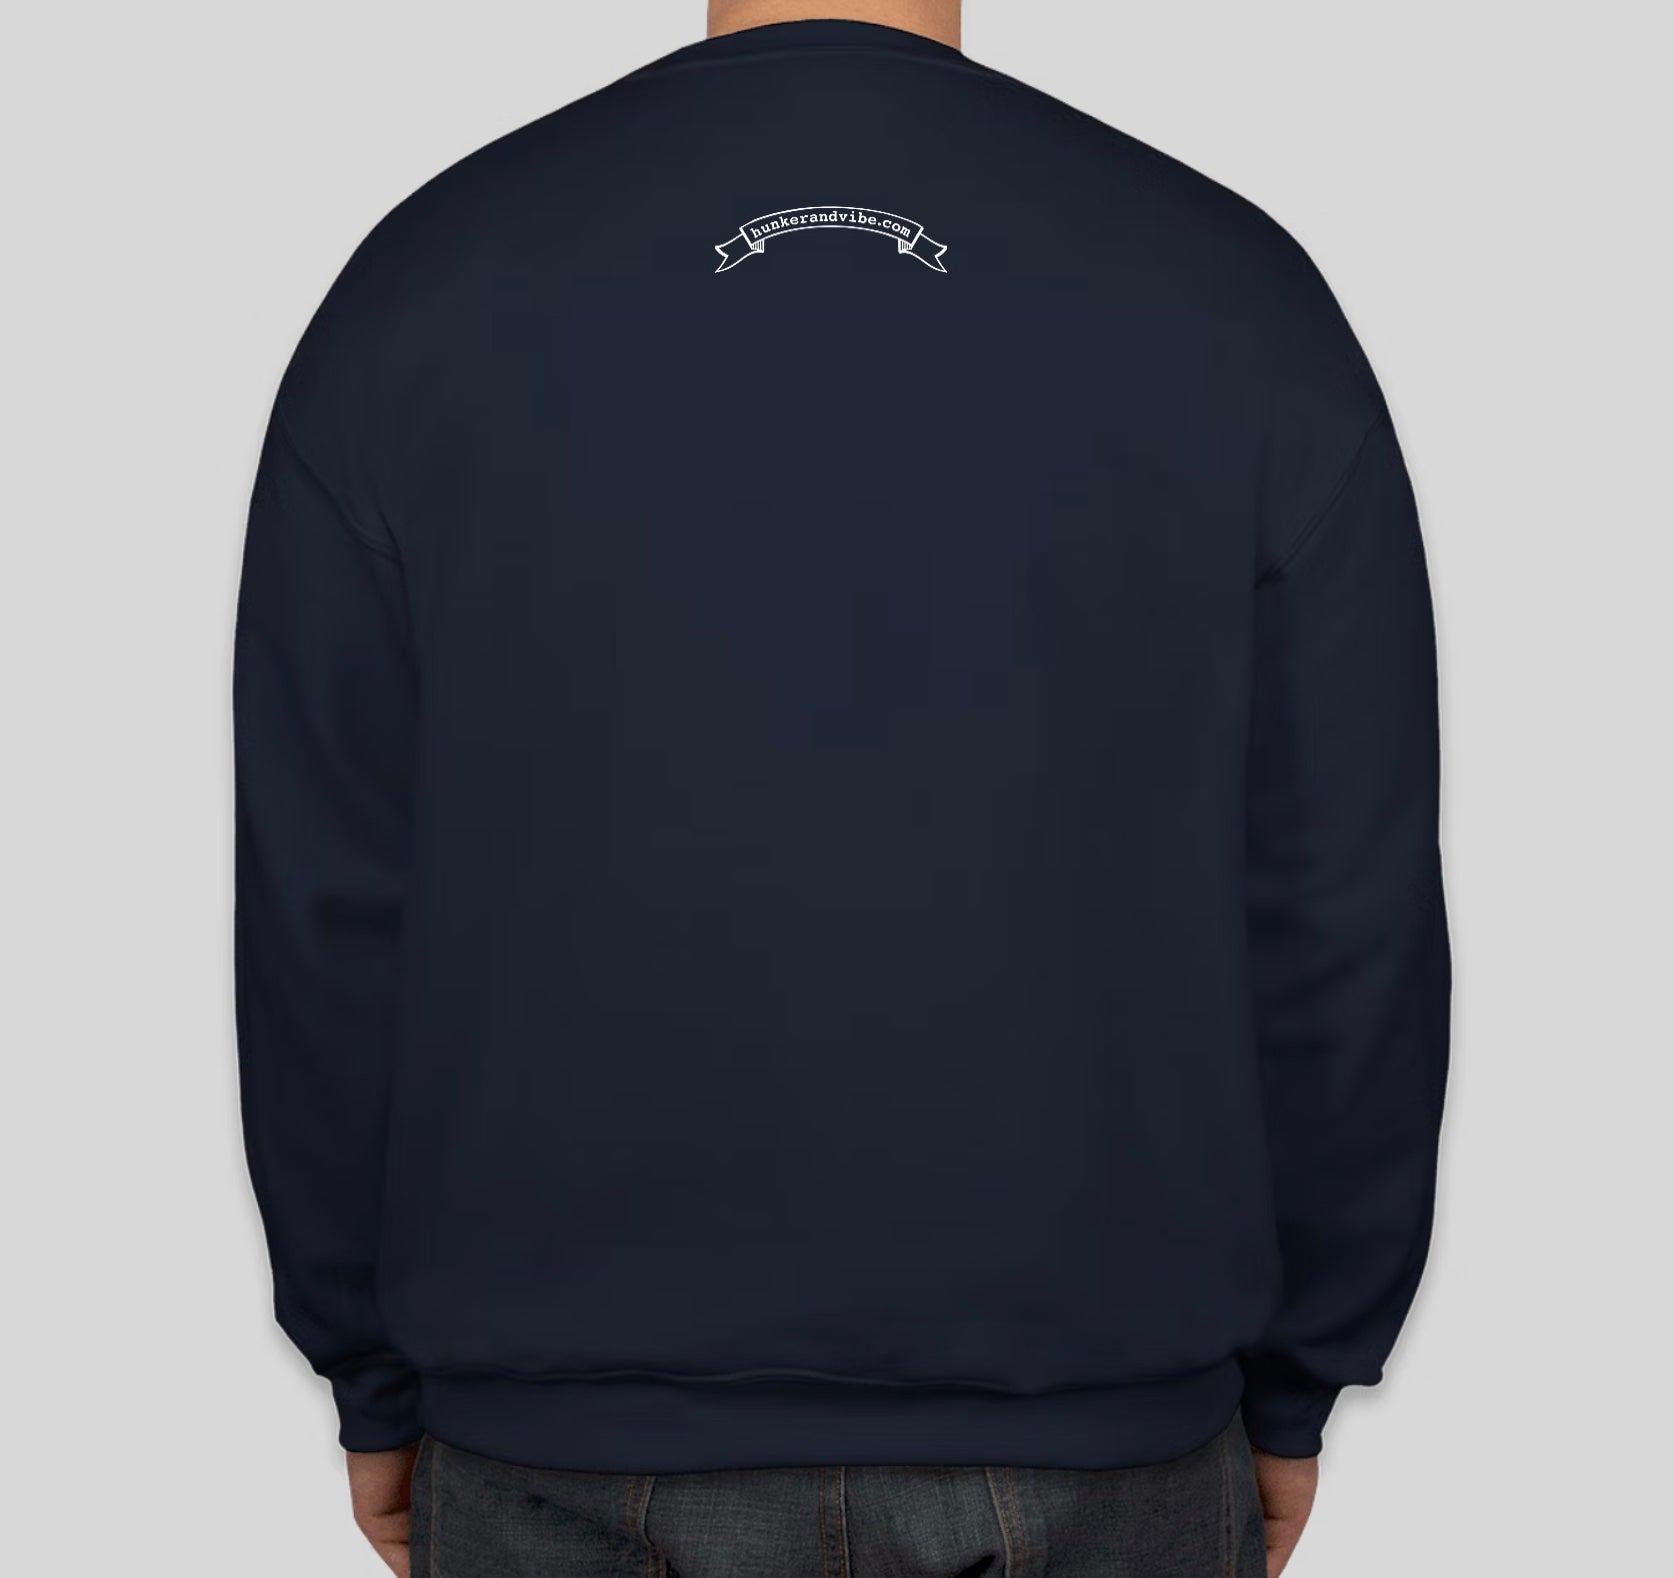 The Hunker & Vibe Boating Crew Neck